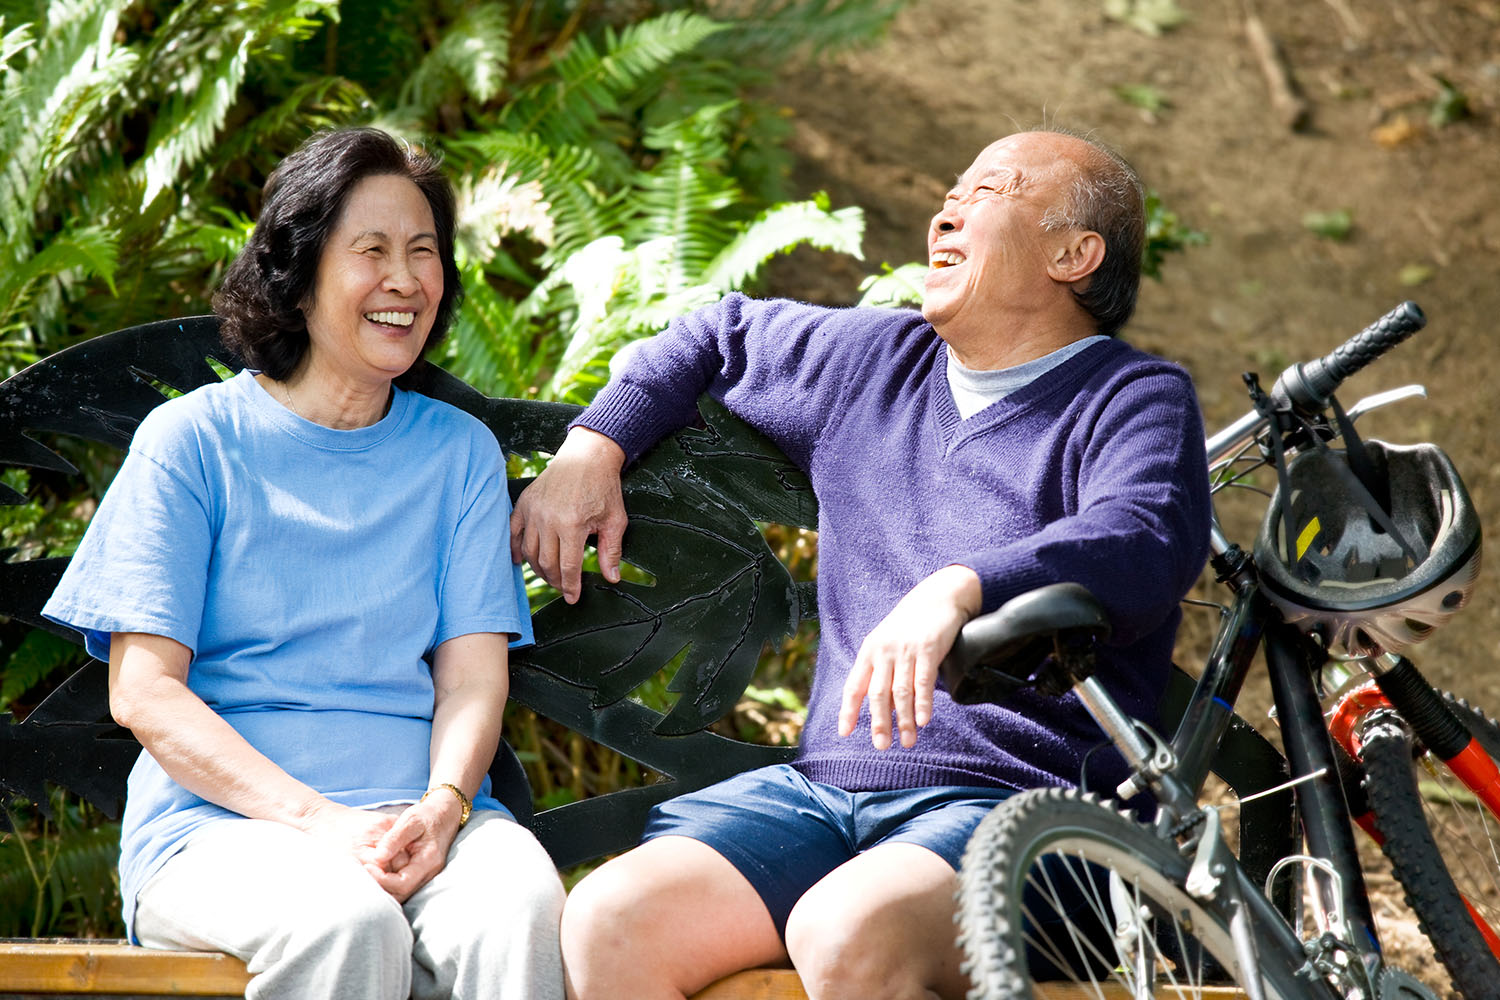 An older woman and man laugh while sitting on a park bench